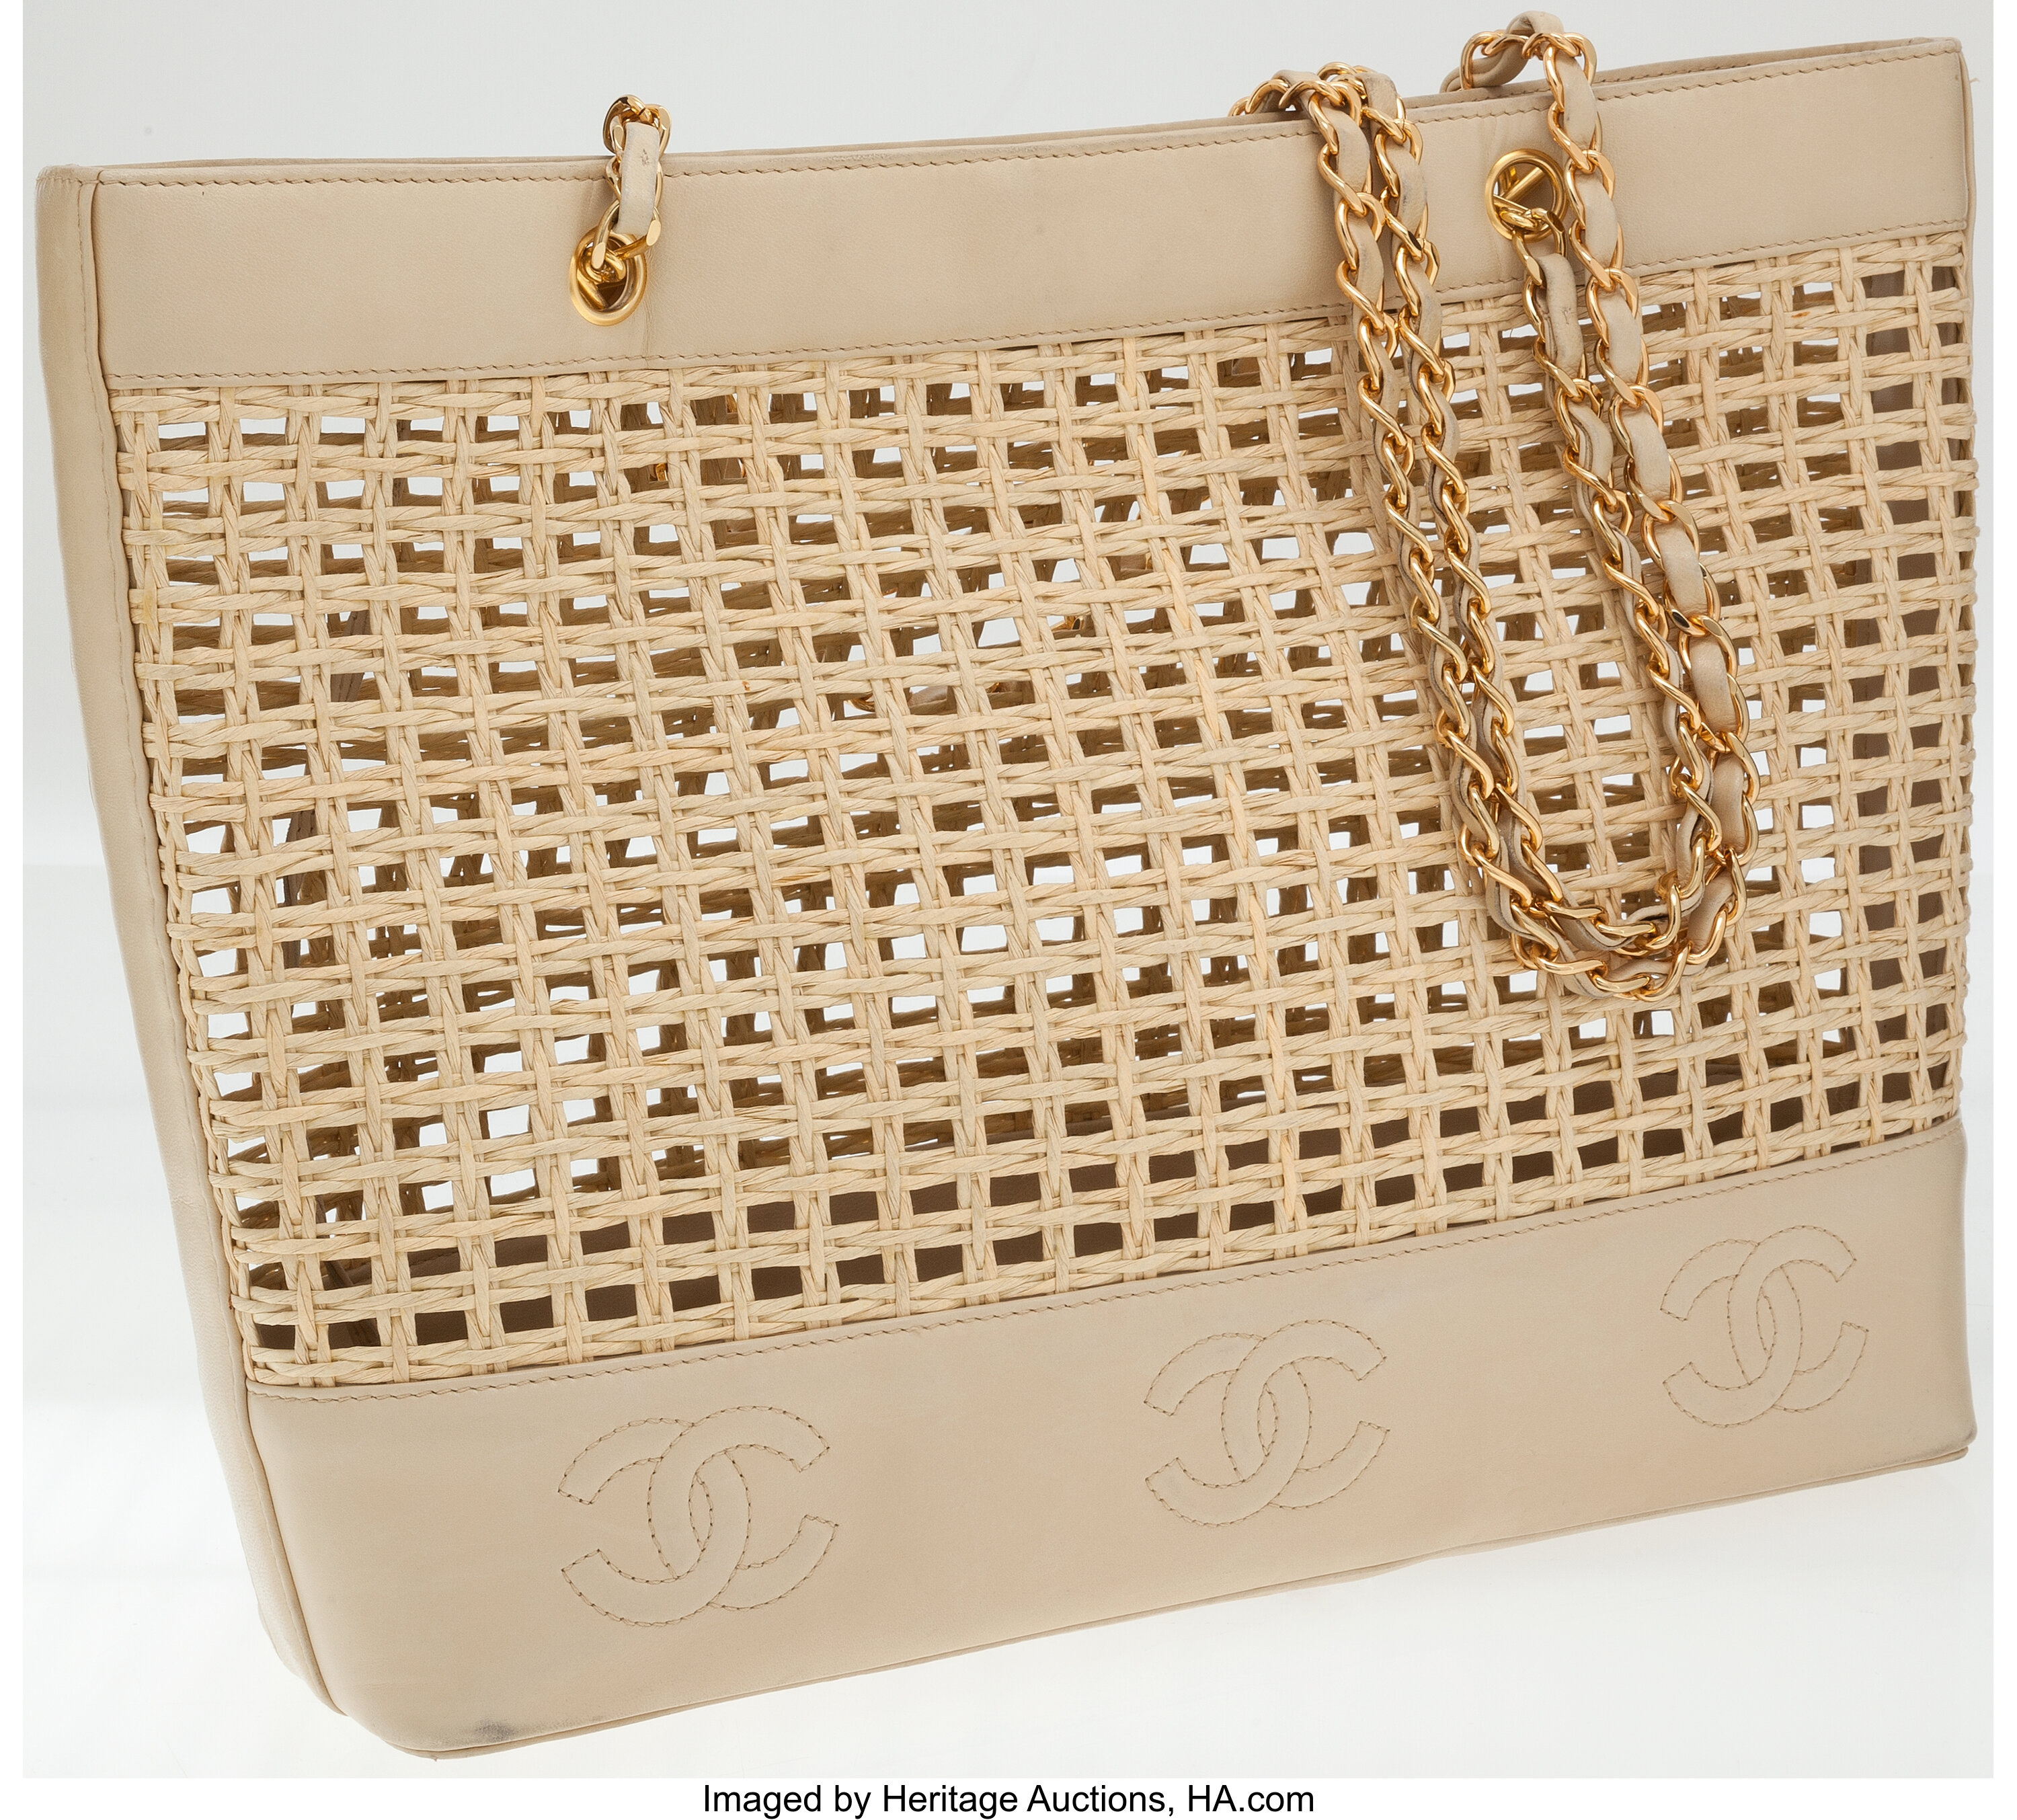 Chanel Wicker and Leather Large Tote Bag with Gold Hardware